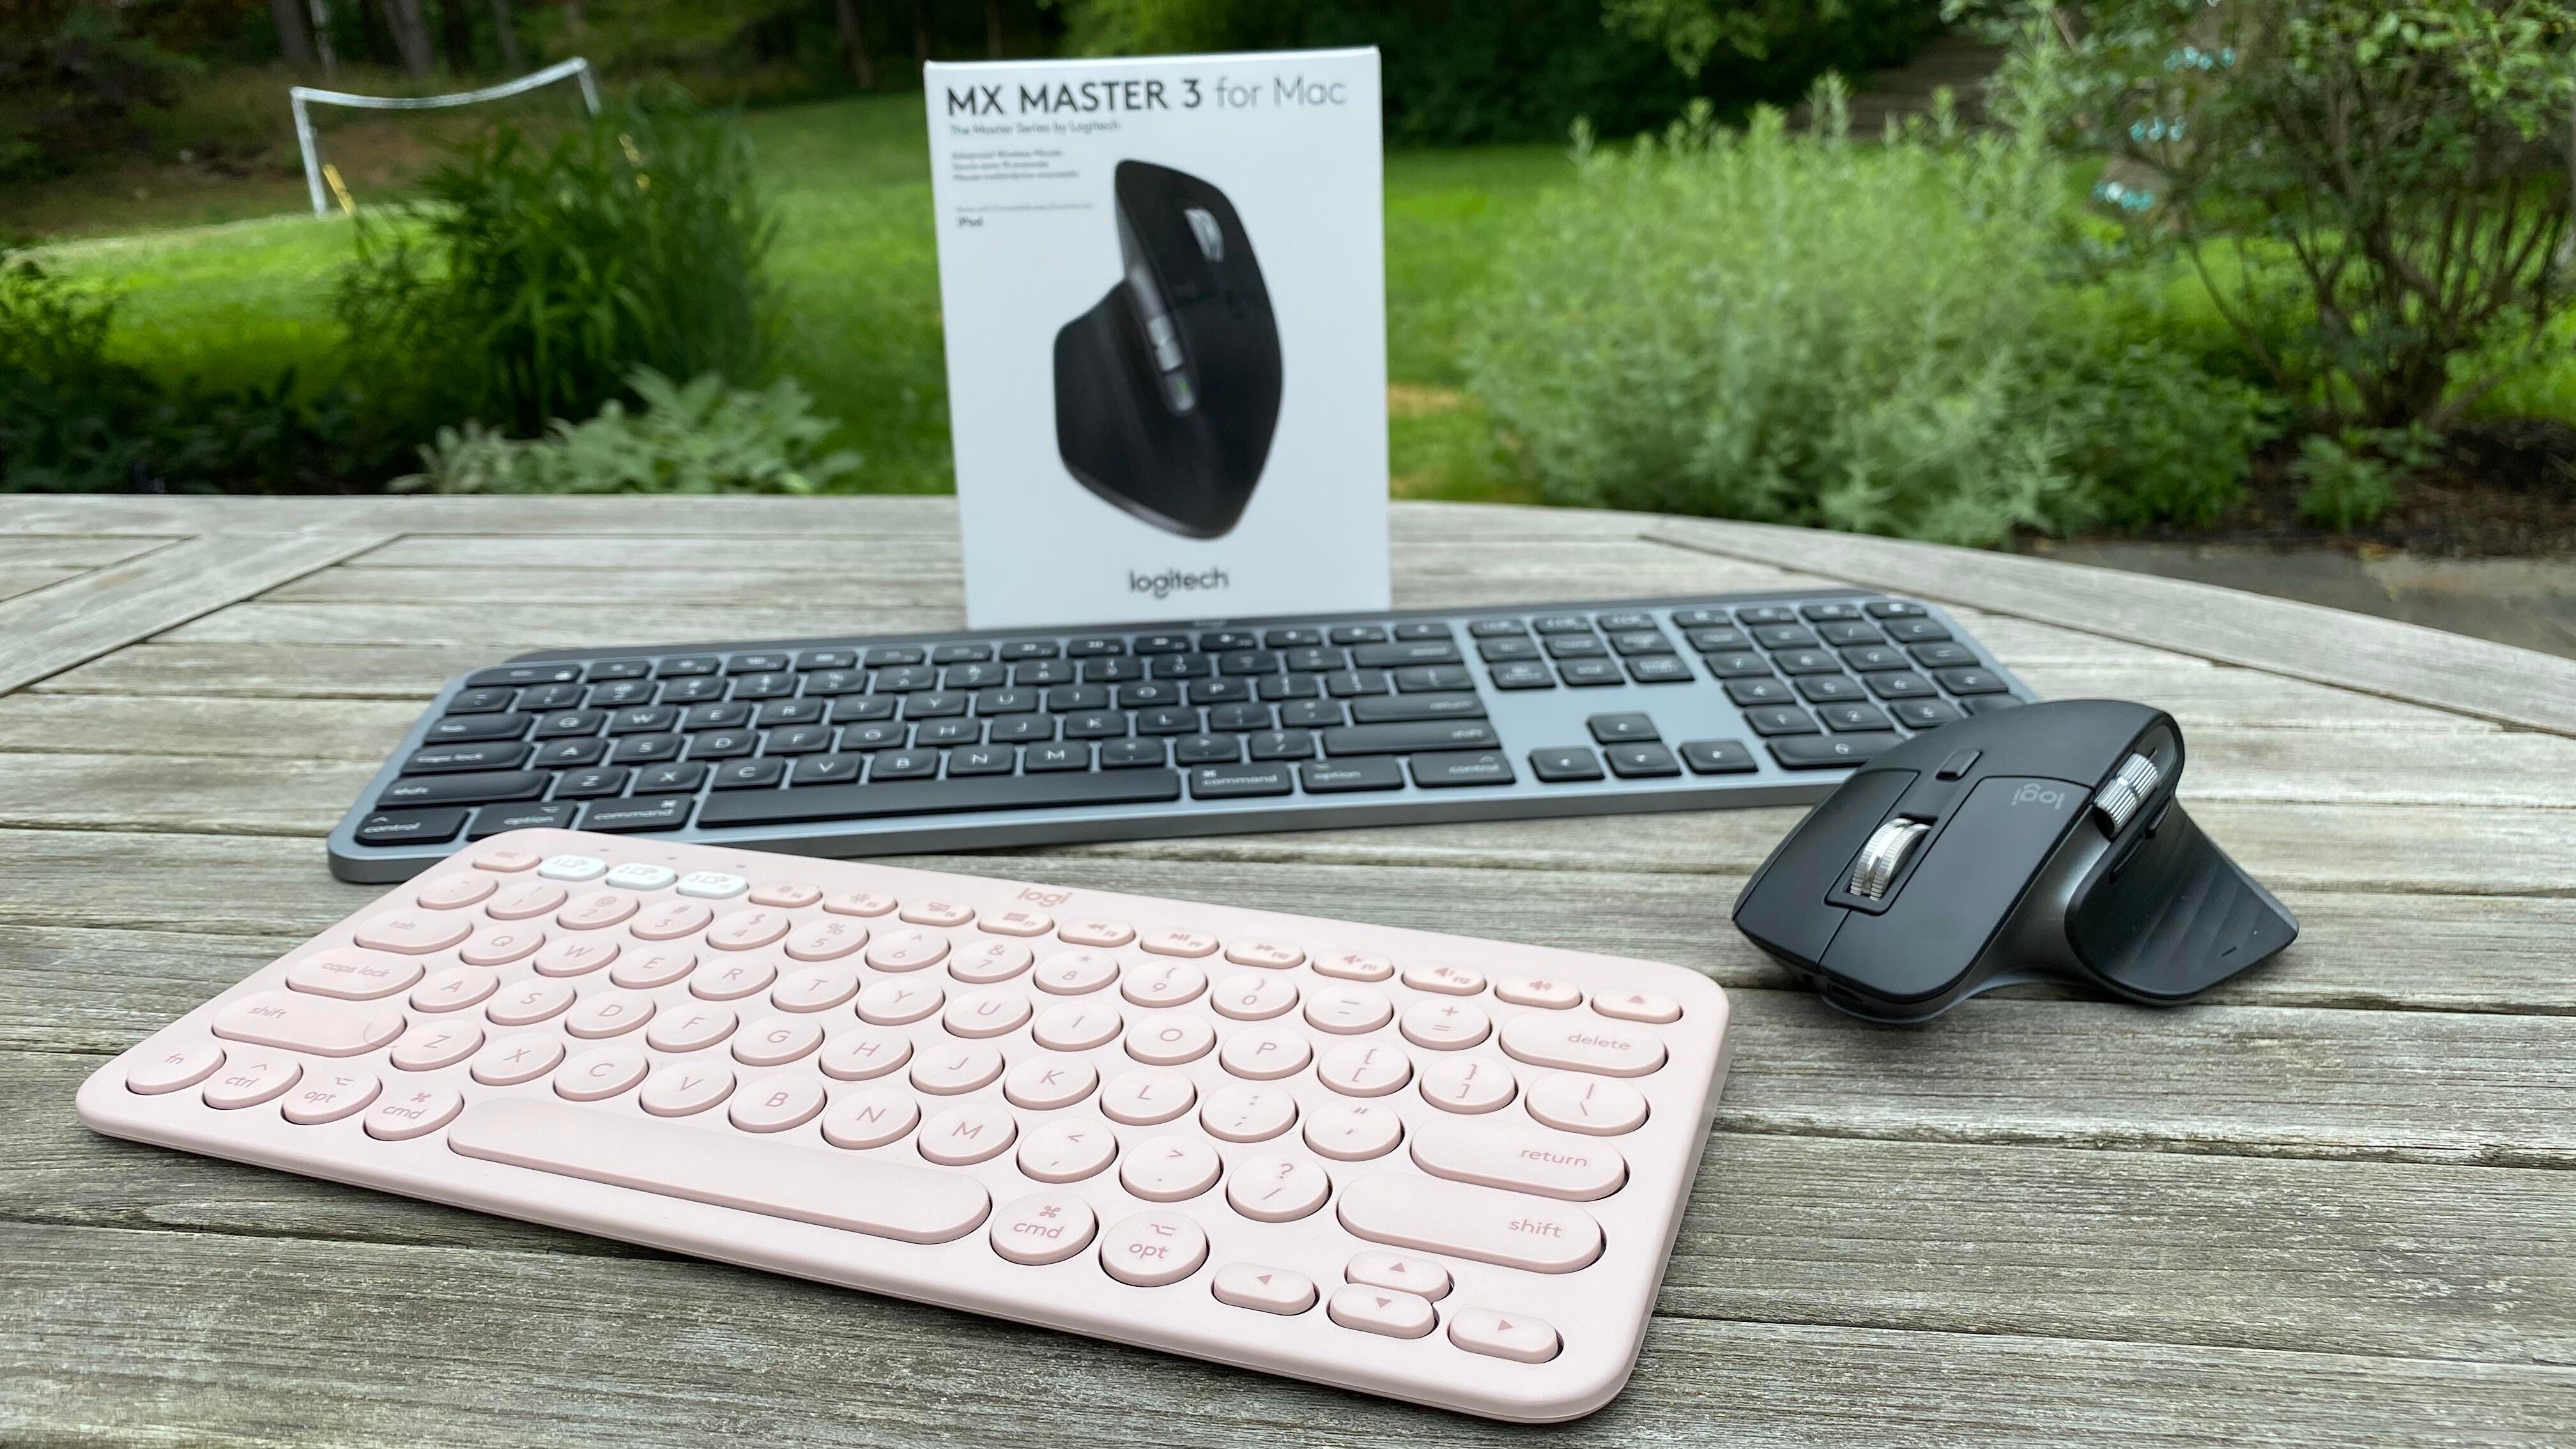 Thrust Amazon Jungle Vedholdende Logitech adds Apple versions of its MX Master 3 mouse and MX Keys keyboard  - CNET